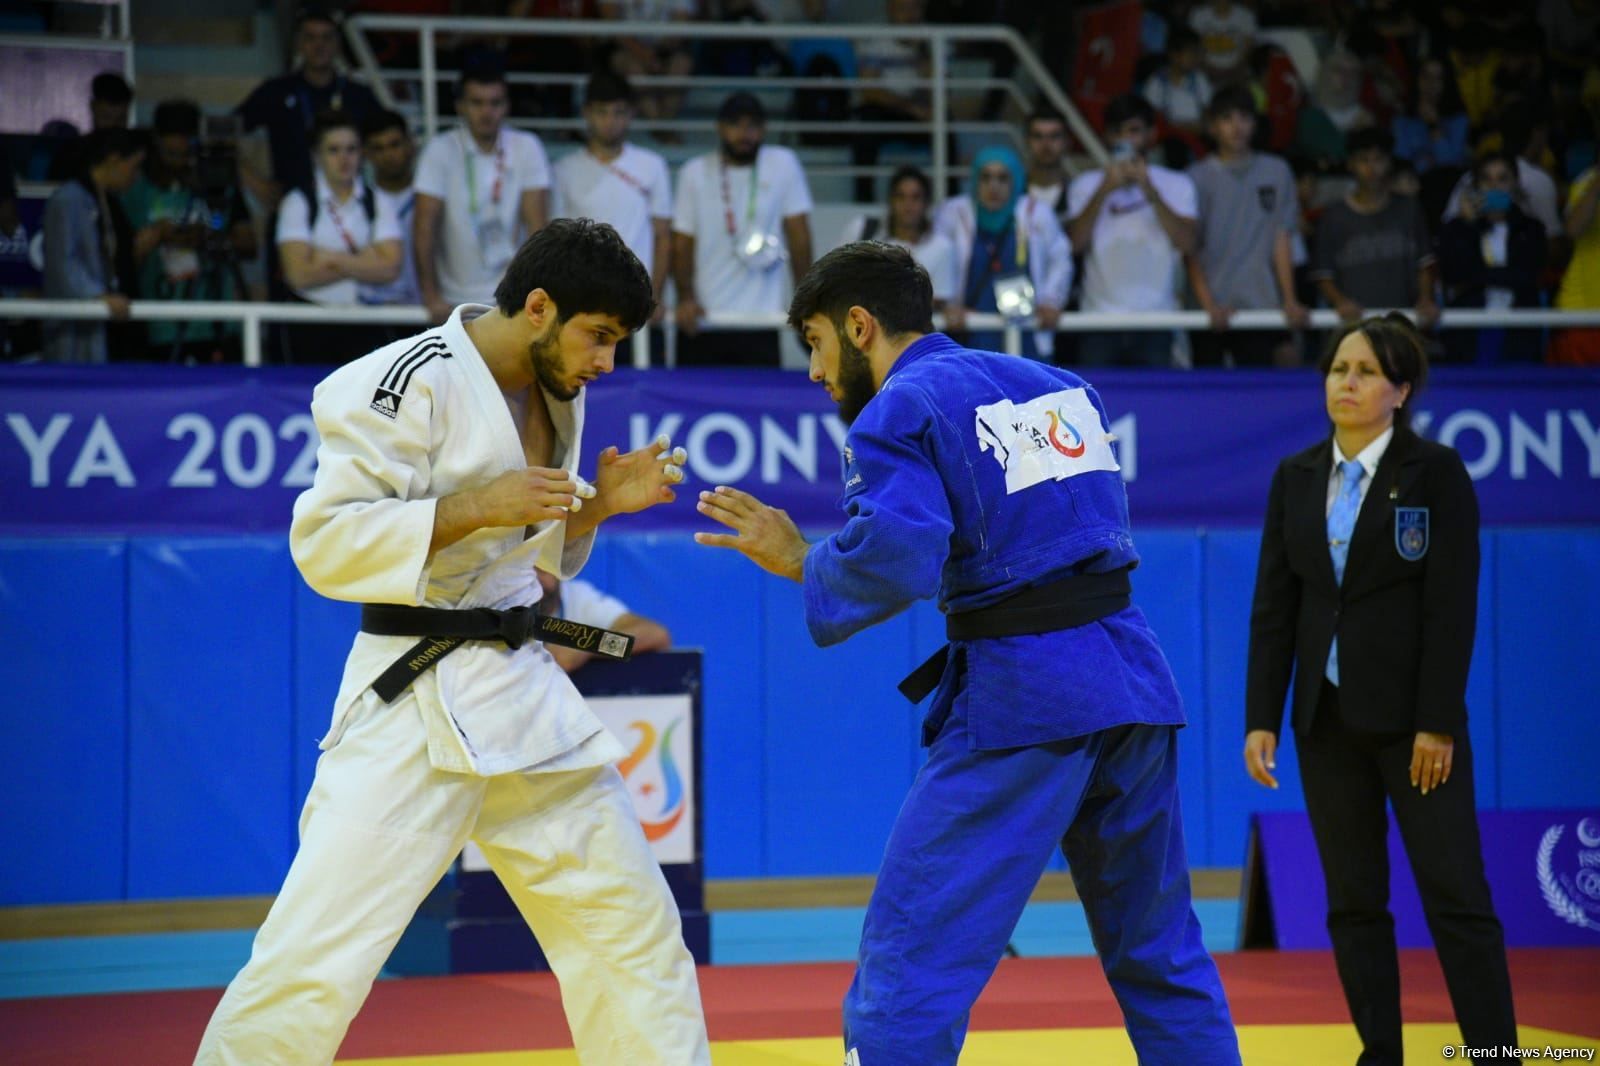 Another Azerbaijani athlete advances to next stage of judo competitions at V Islamic Solidarity Games [PHOTO]